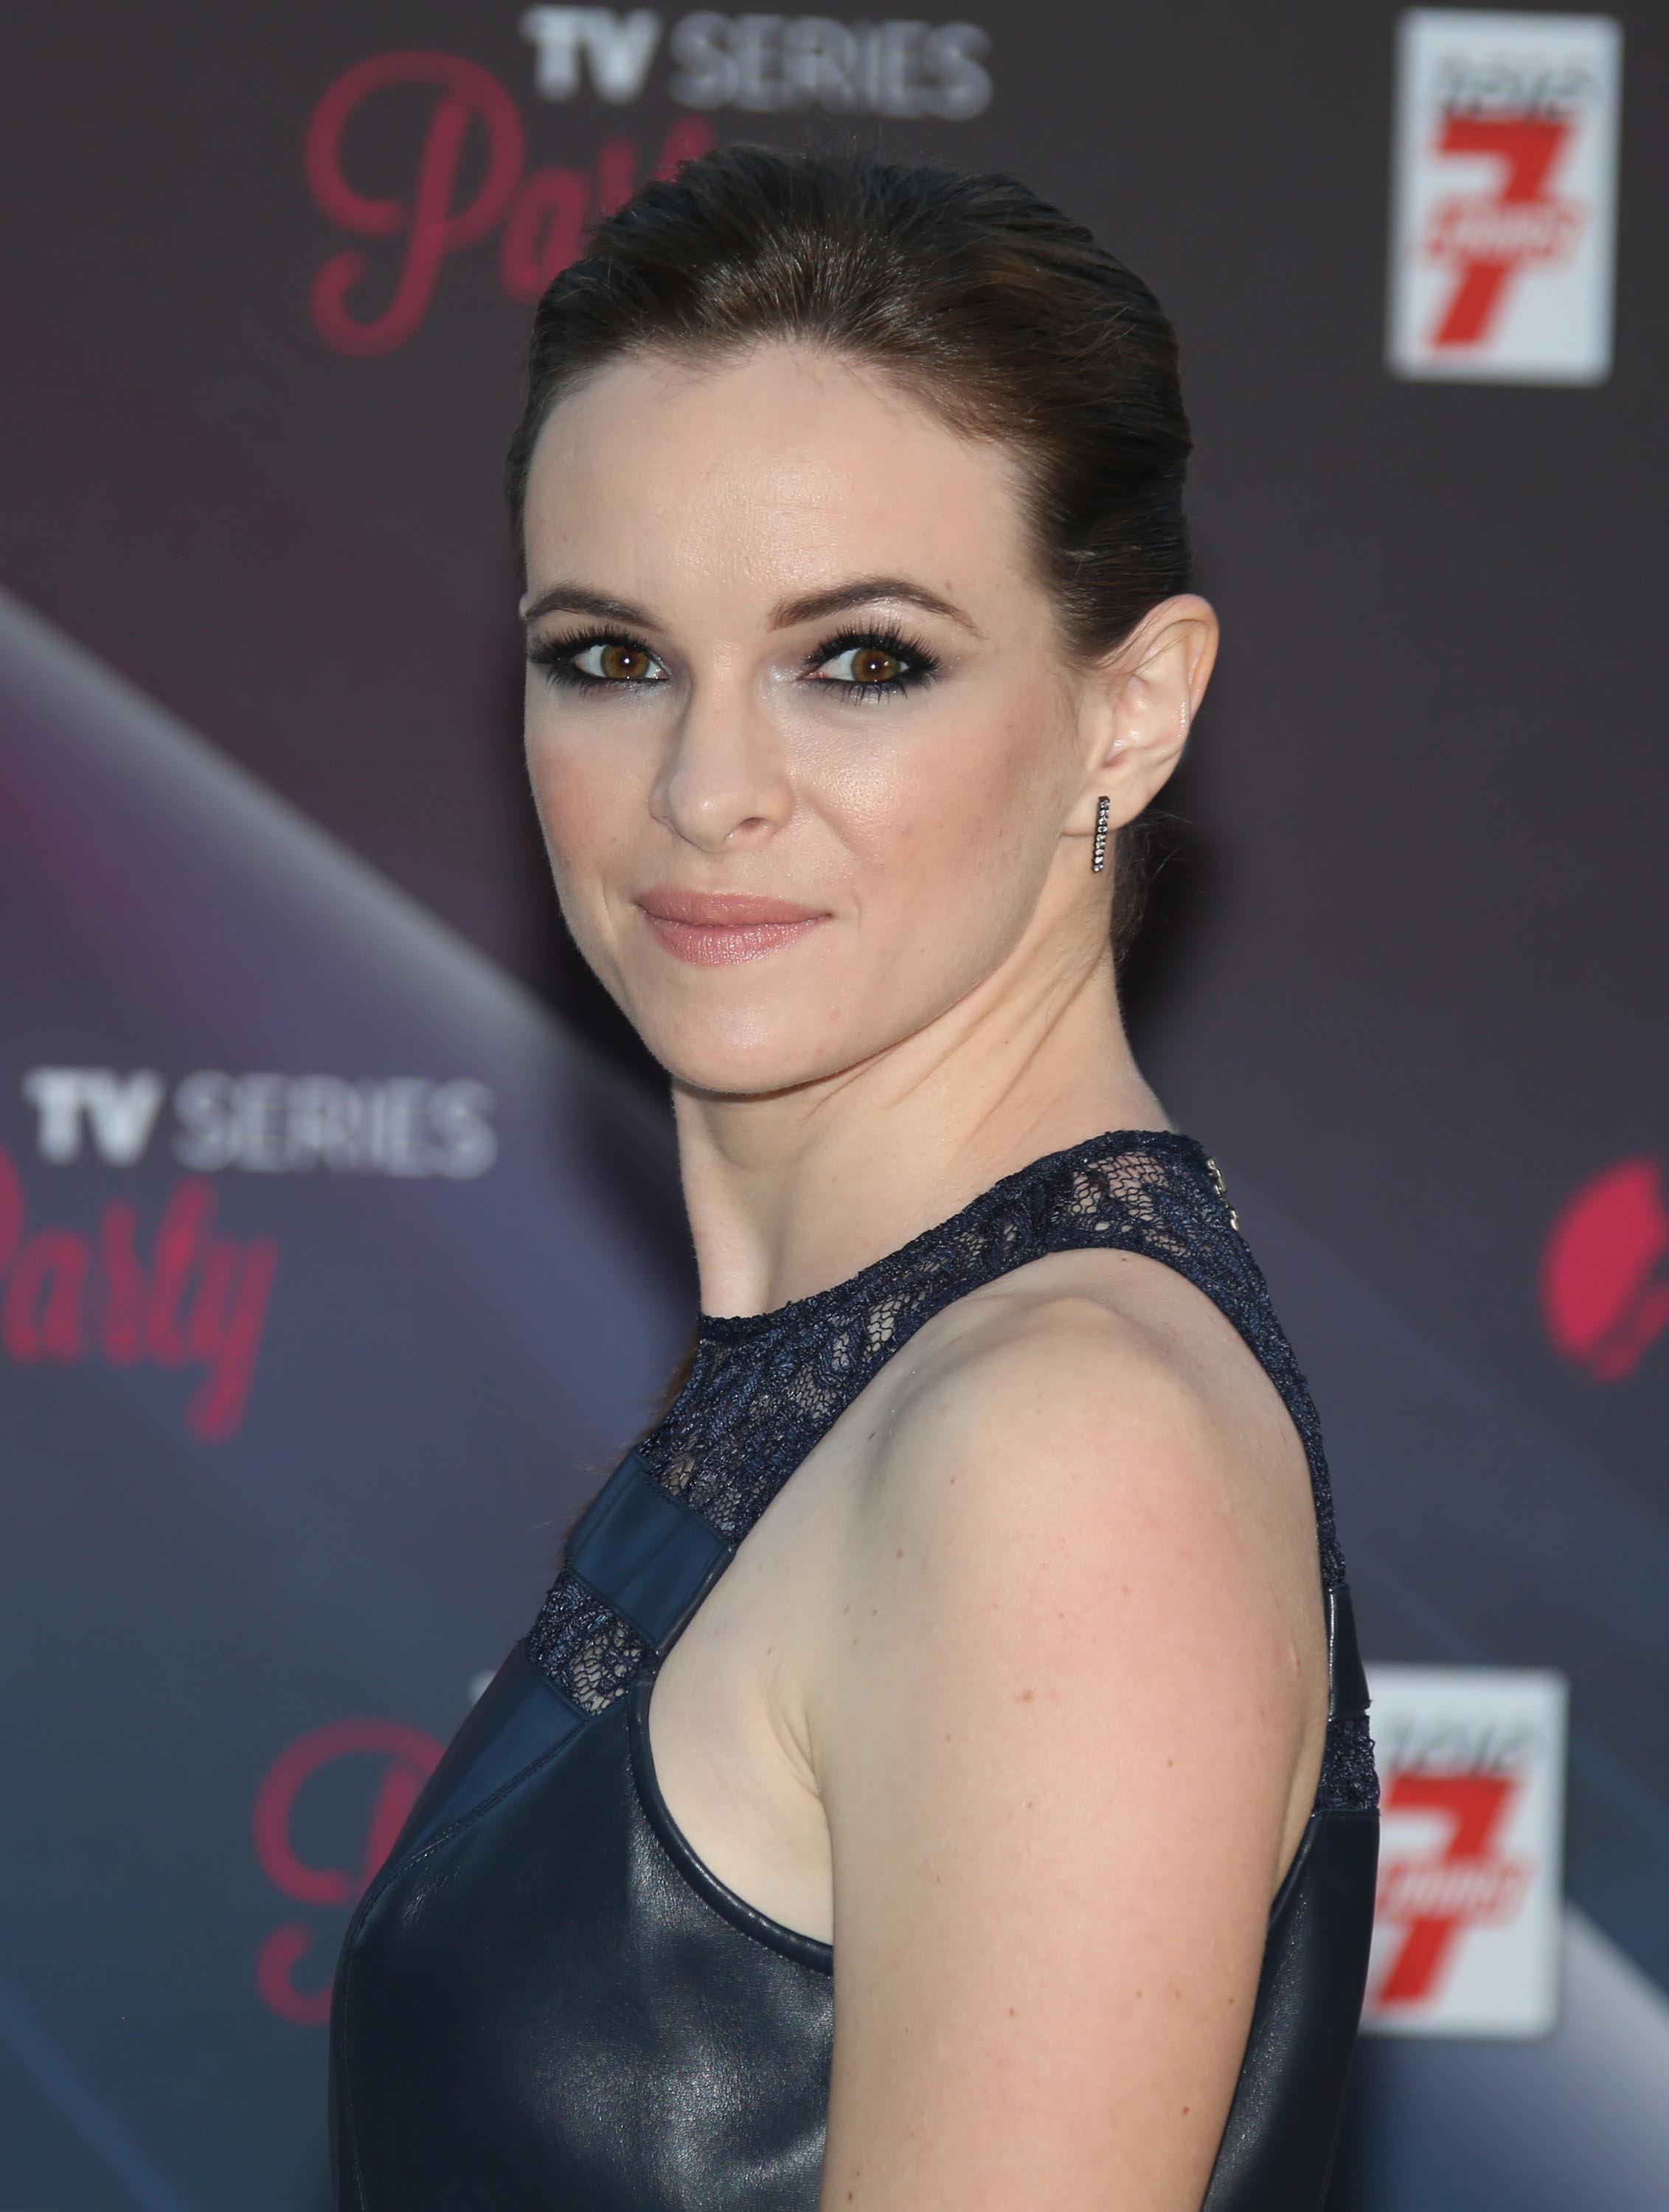 Danielle Panabaker at the 56th Monte Carlo TV Festival